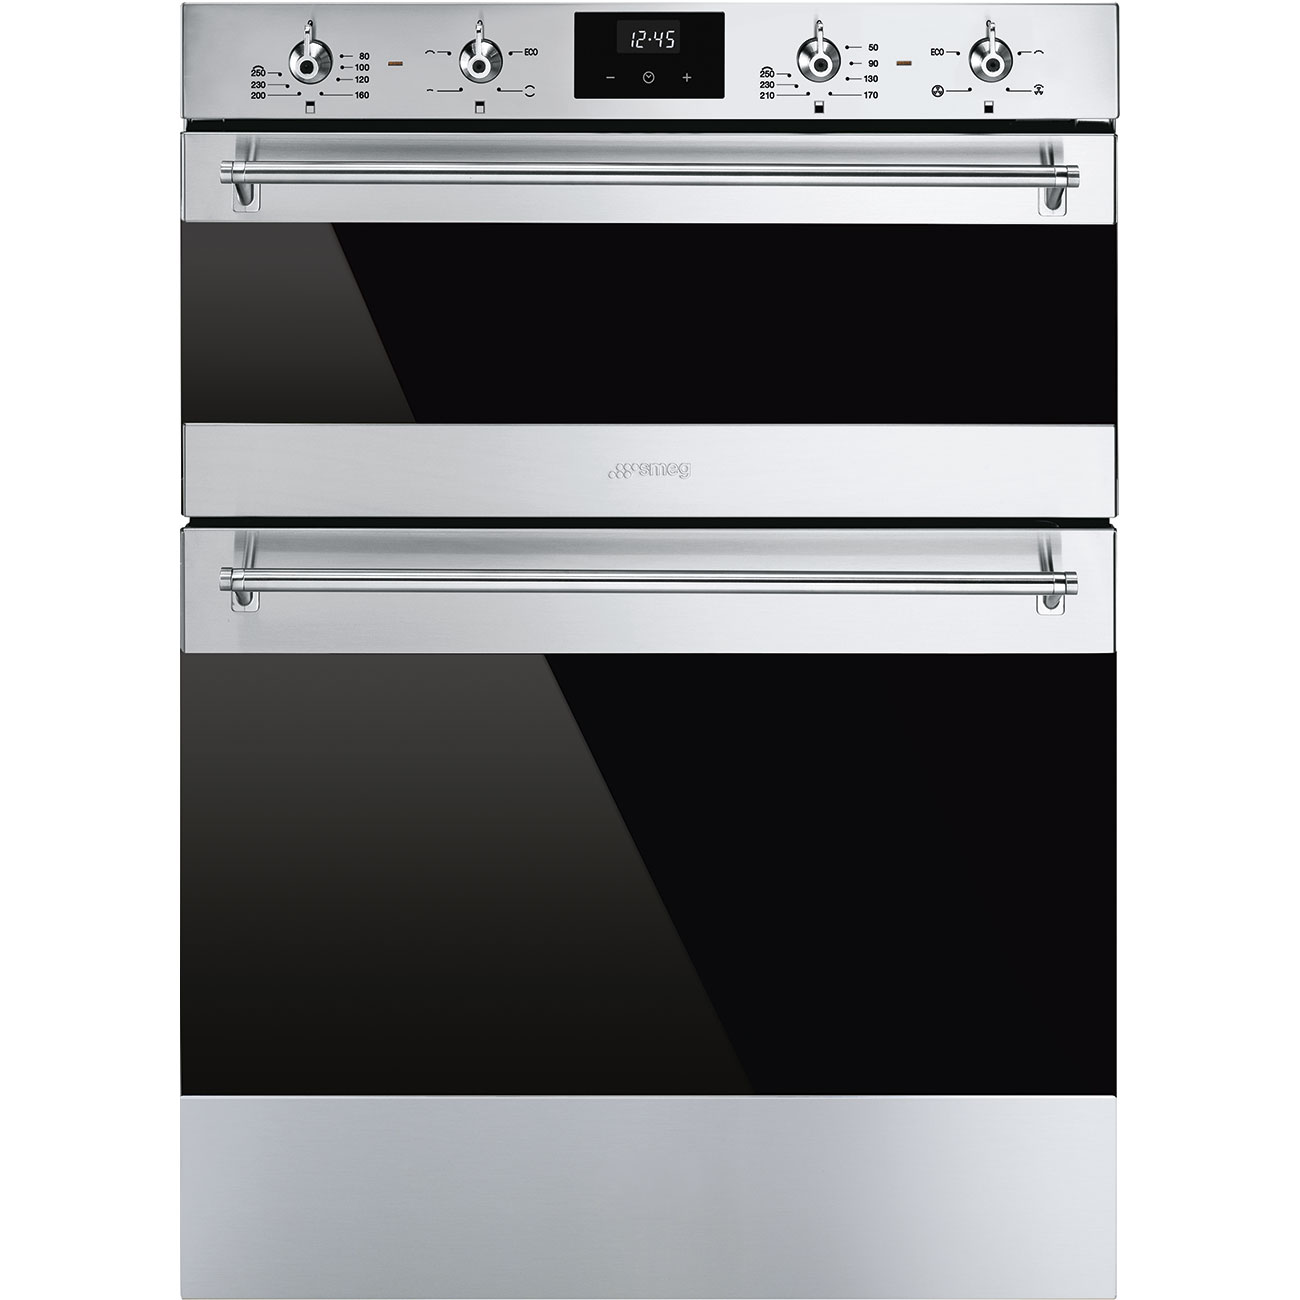 Stainless steel Double under-counter Oven - Smeg DUSF6300X_1